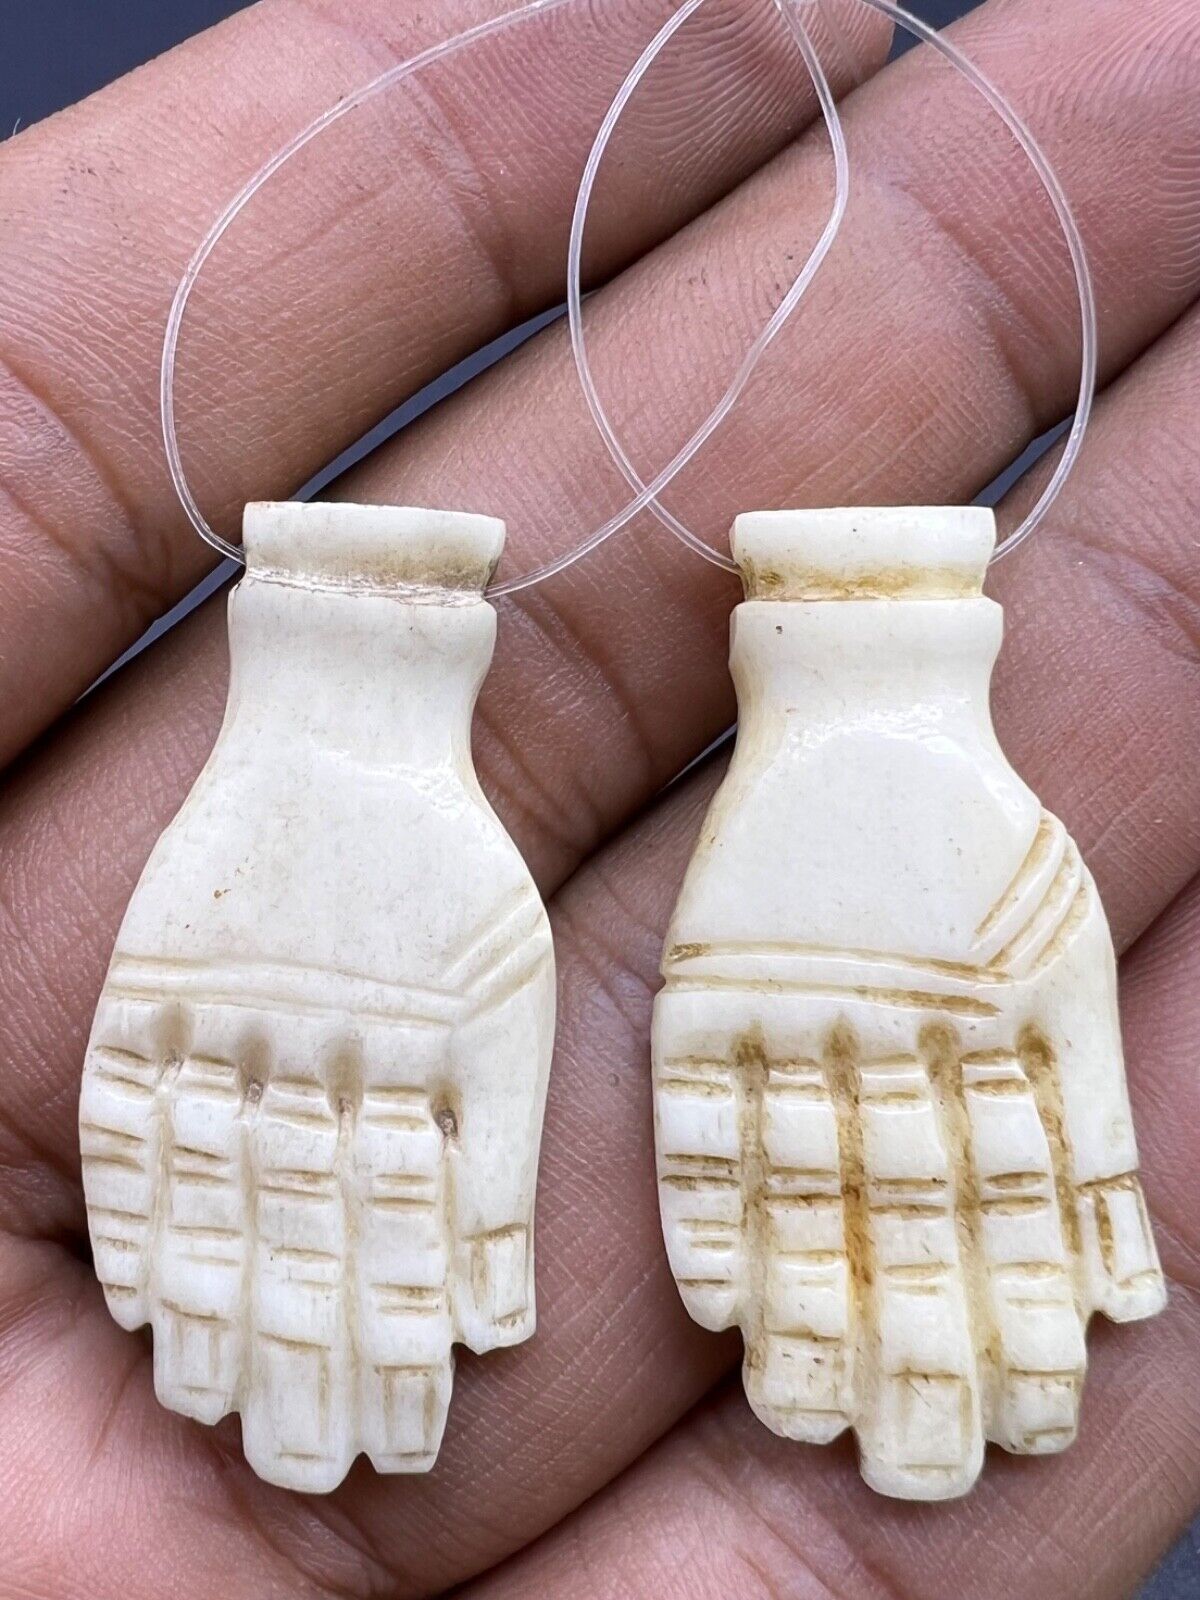 Extremely Amazing Rare Old Bacteria Margarine Pair Hands B0ne Amulet Bead Penden